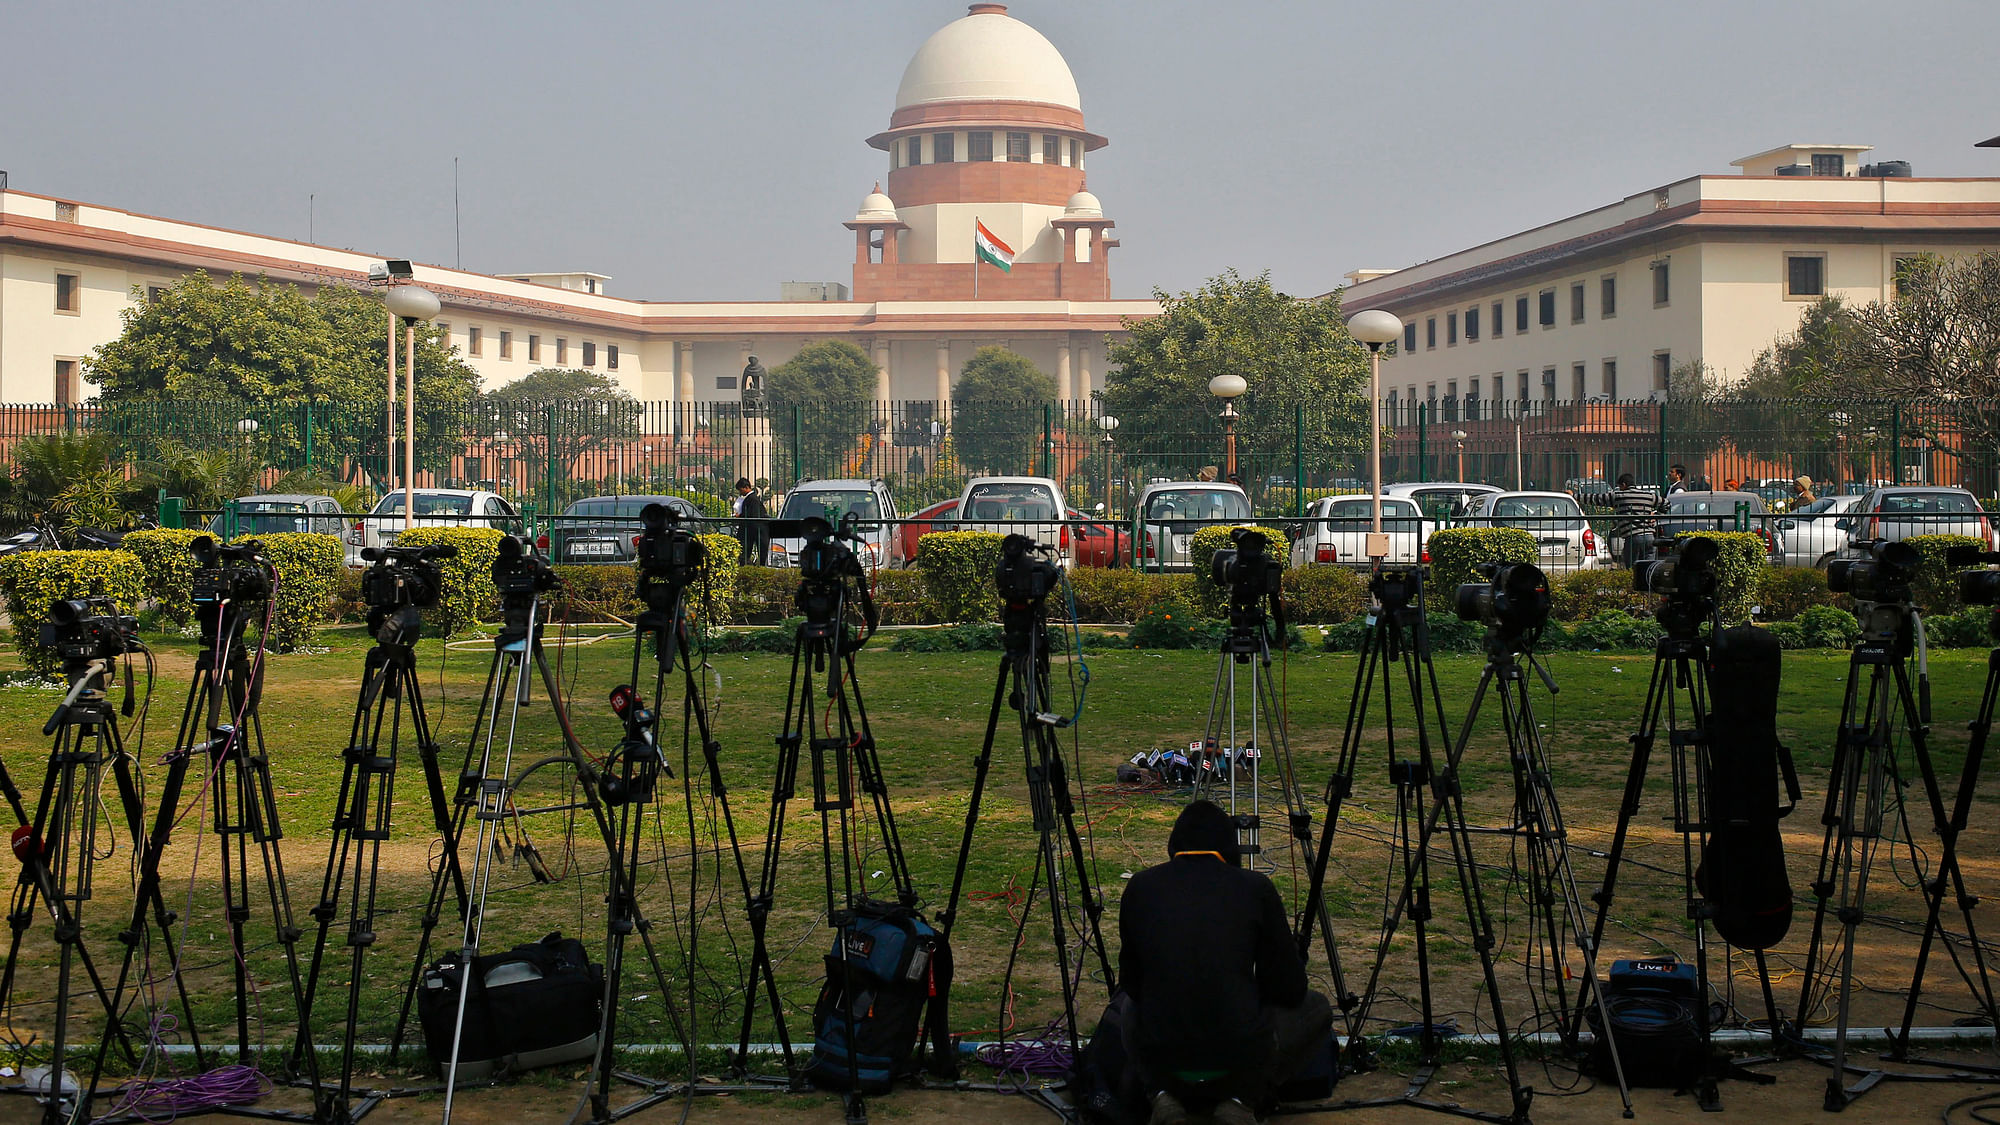 The Supreme Court on Wednesday refused to modify order restricting use of Aadhaar cards. (Photo: Reuters)